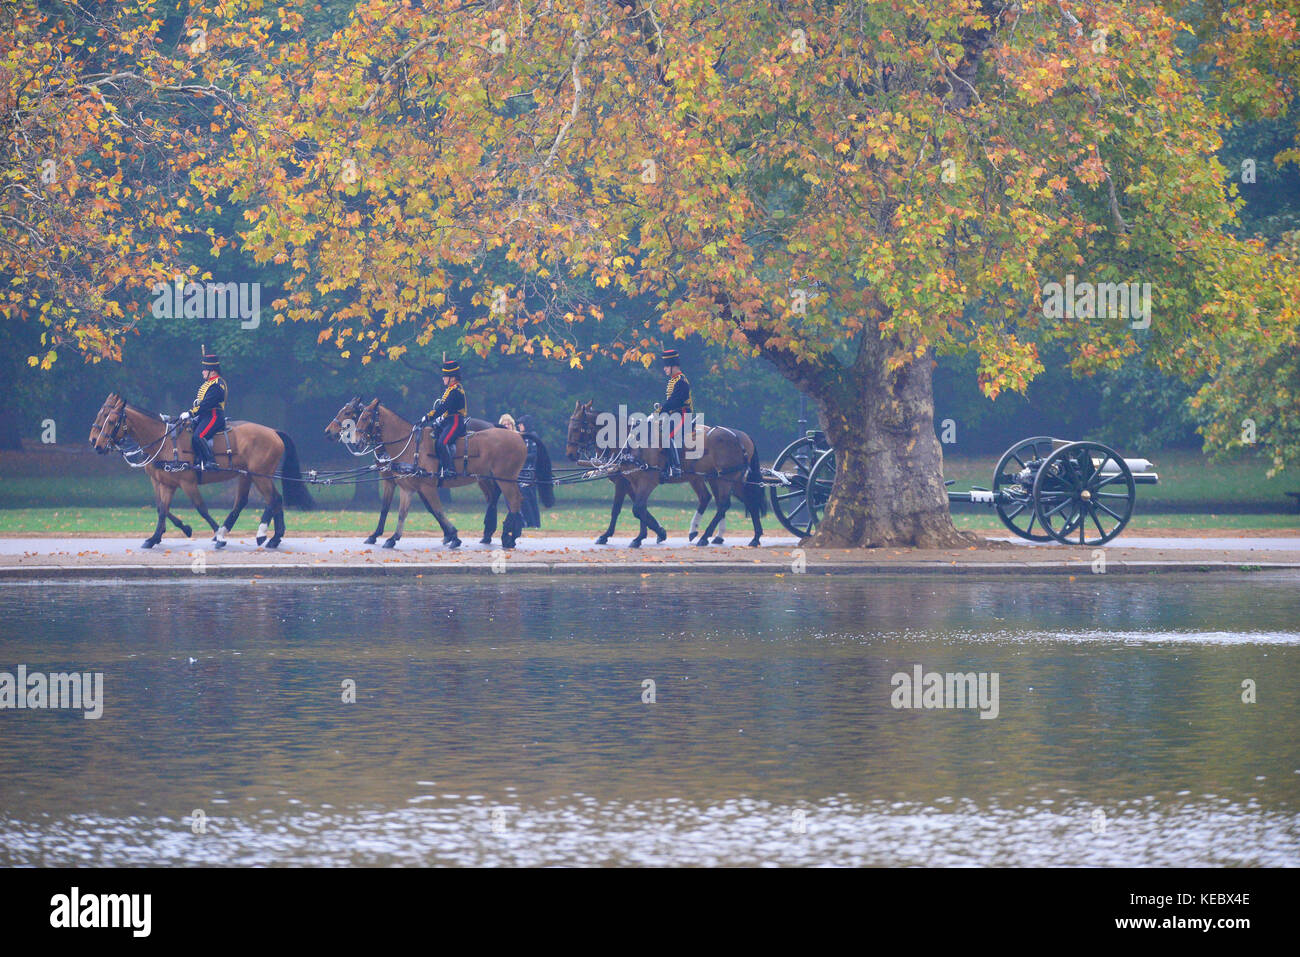 Royal Review of the King's Troop Royal Horse Artillery for Their 70th Anniversary in Hyde Park, a Londra, Regno Unito Foto Stock